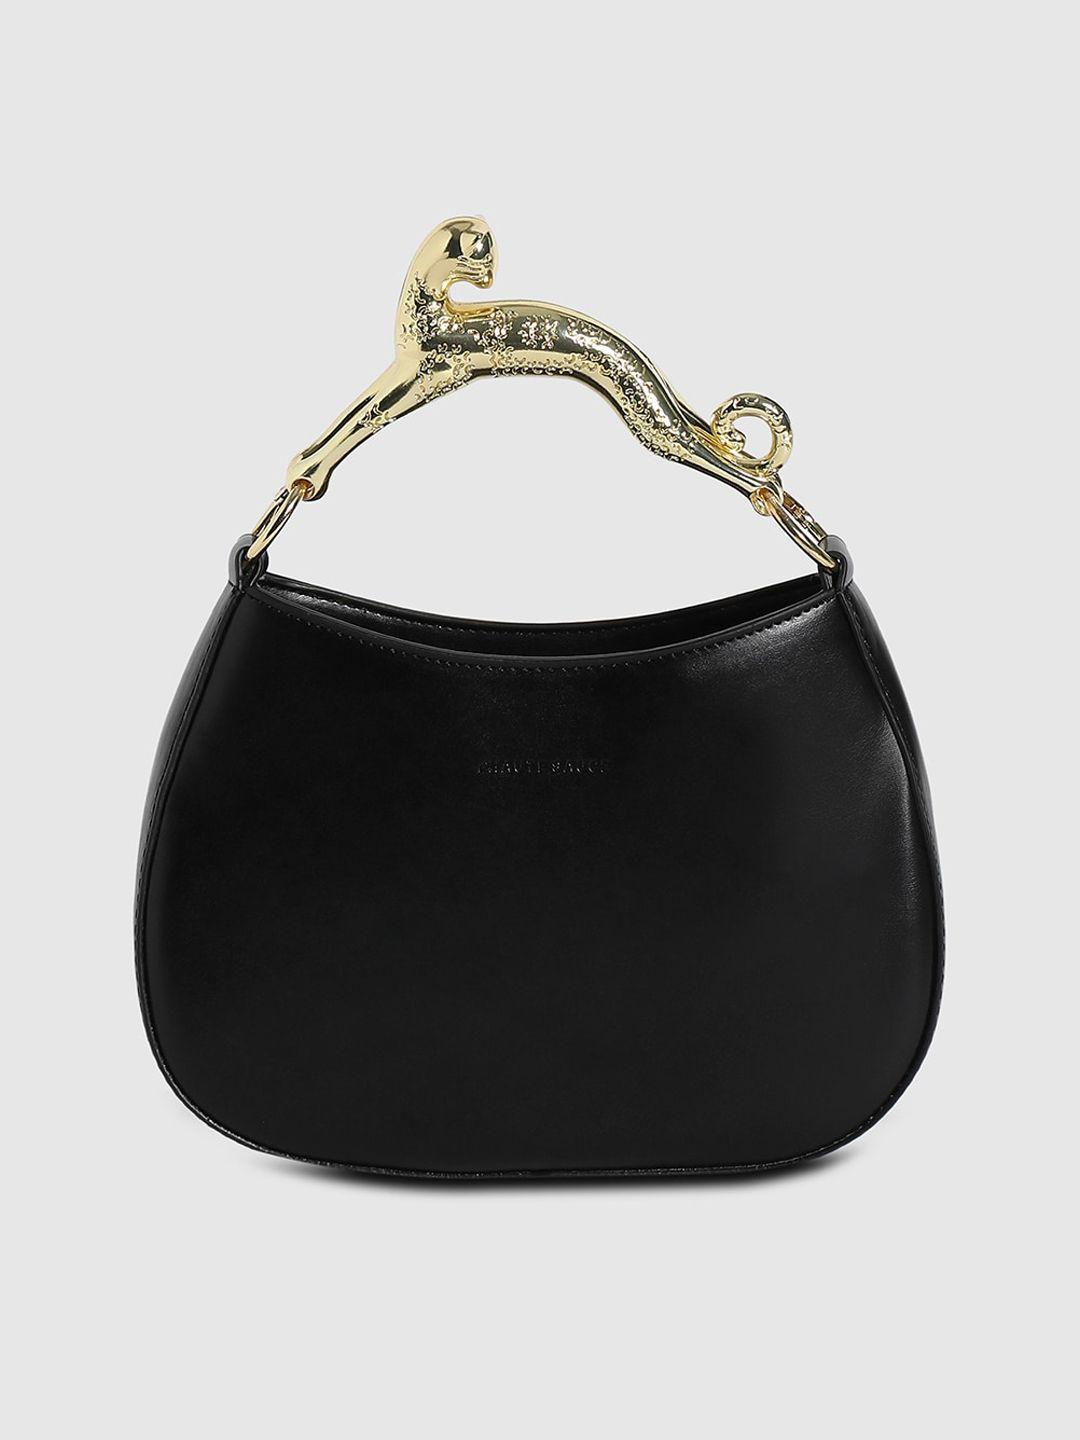 haute sauce by campus sutra black oversized bucket hobo bag